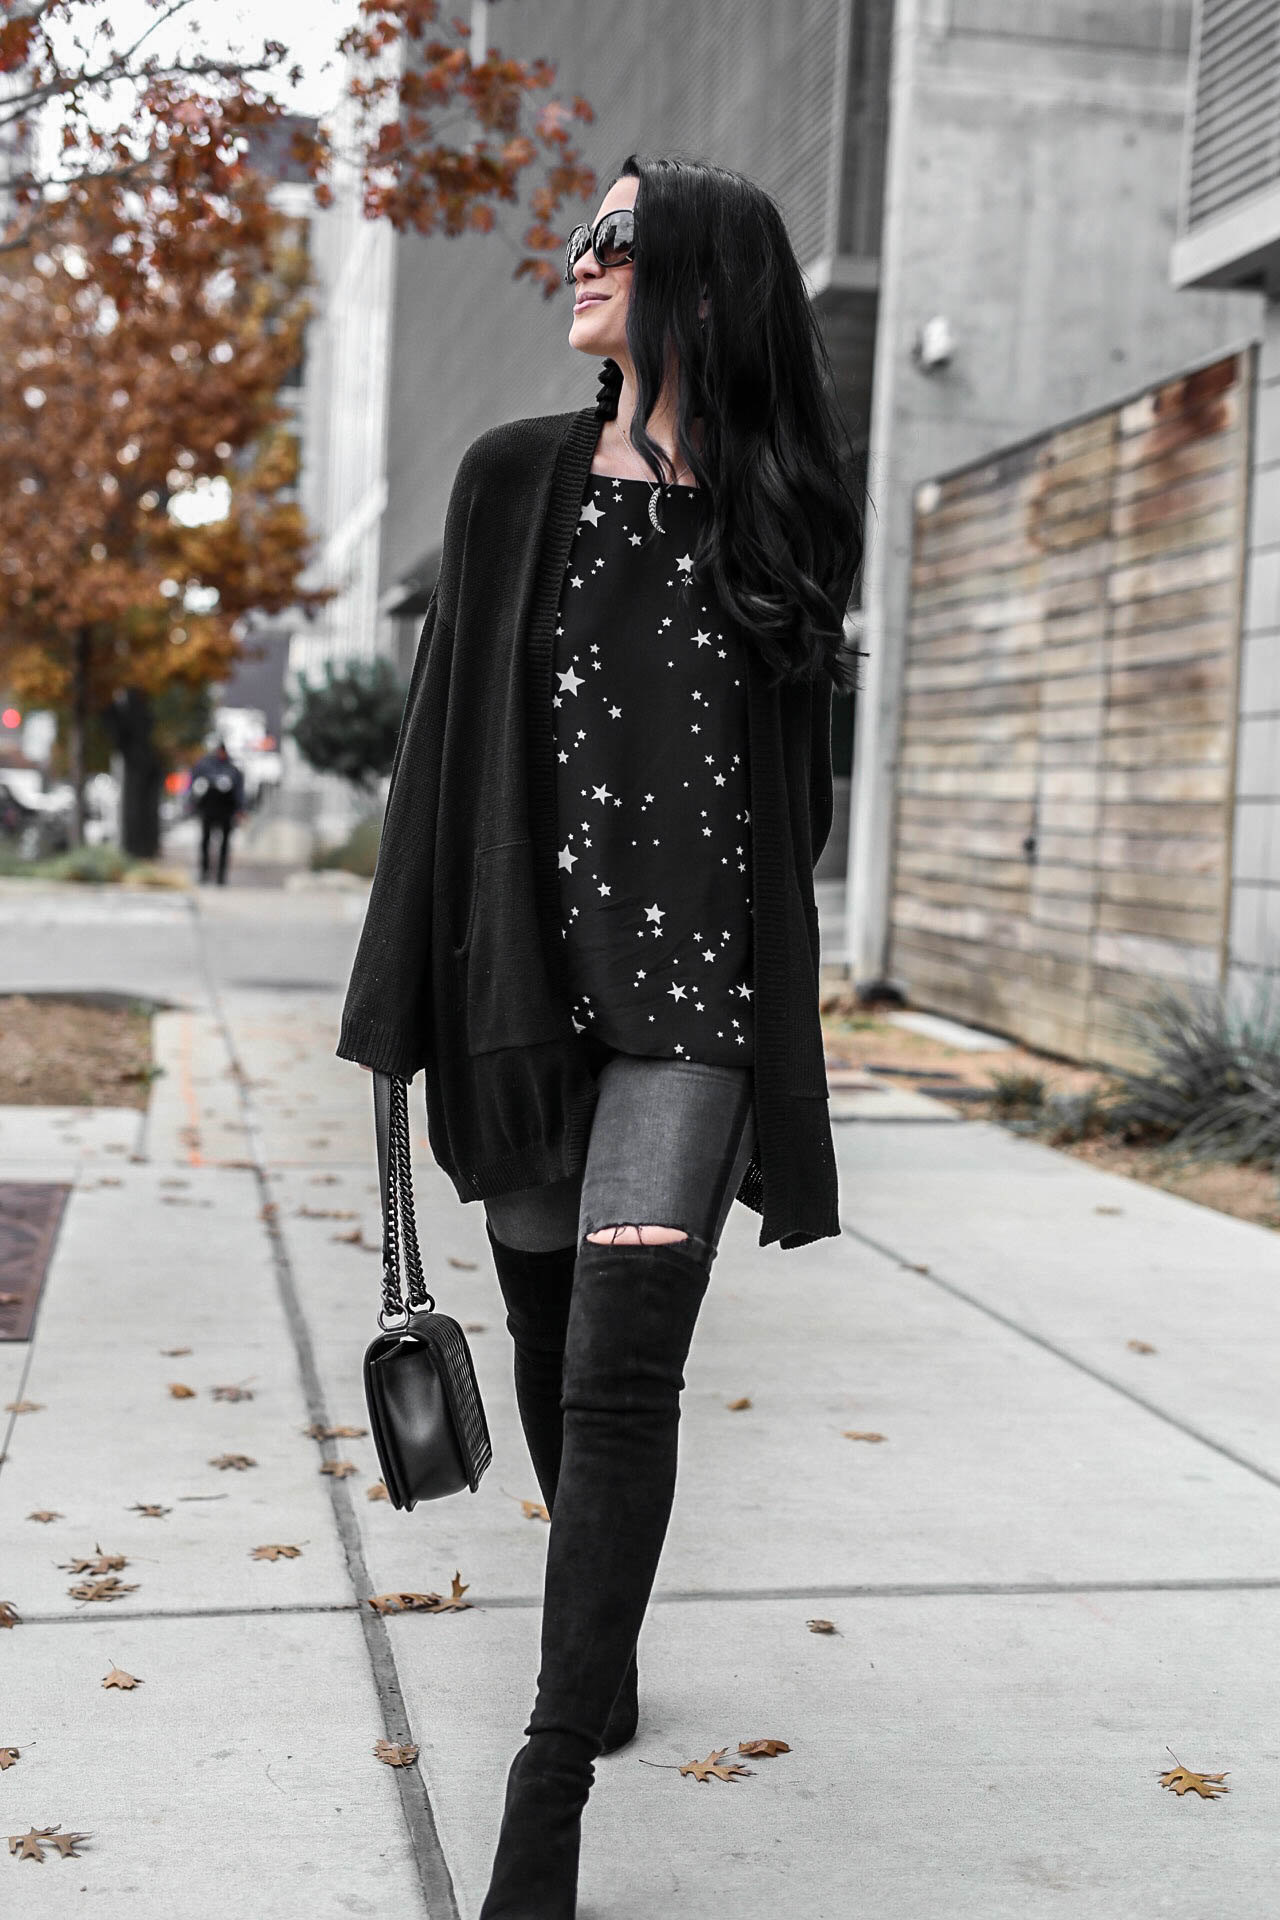 DTKAustin shares how to pull off an all black look as well as why she has an affinity for stars and moons. Cardigan from Show me Your Mumu. | black distressed jeans | Chanel handbag | OTK suede leather boots | all black fashion for women | all black outfit for winter | over the knee boots style || Dressed to Kill #otkboots #allblack #distressedjeans